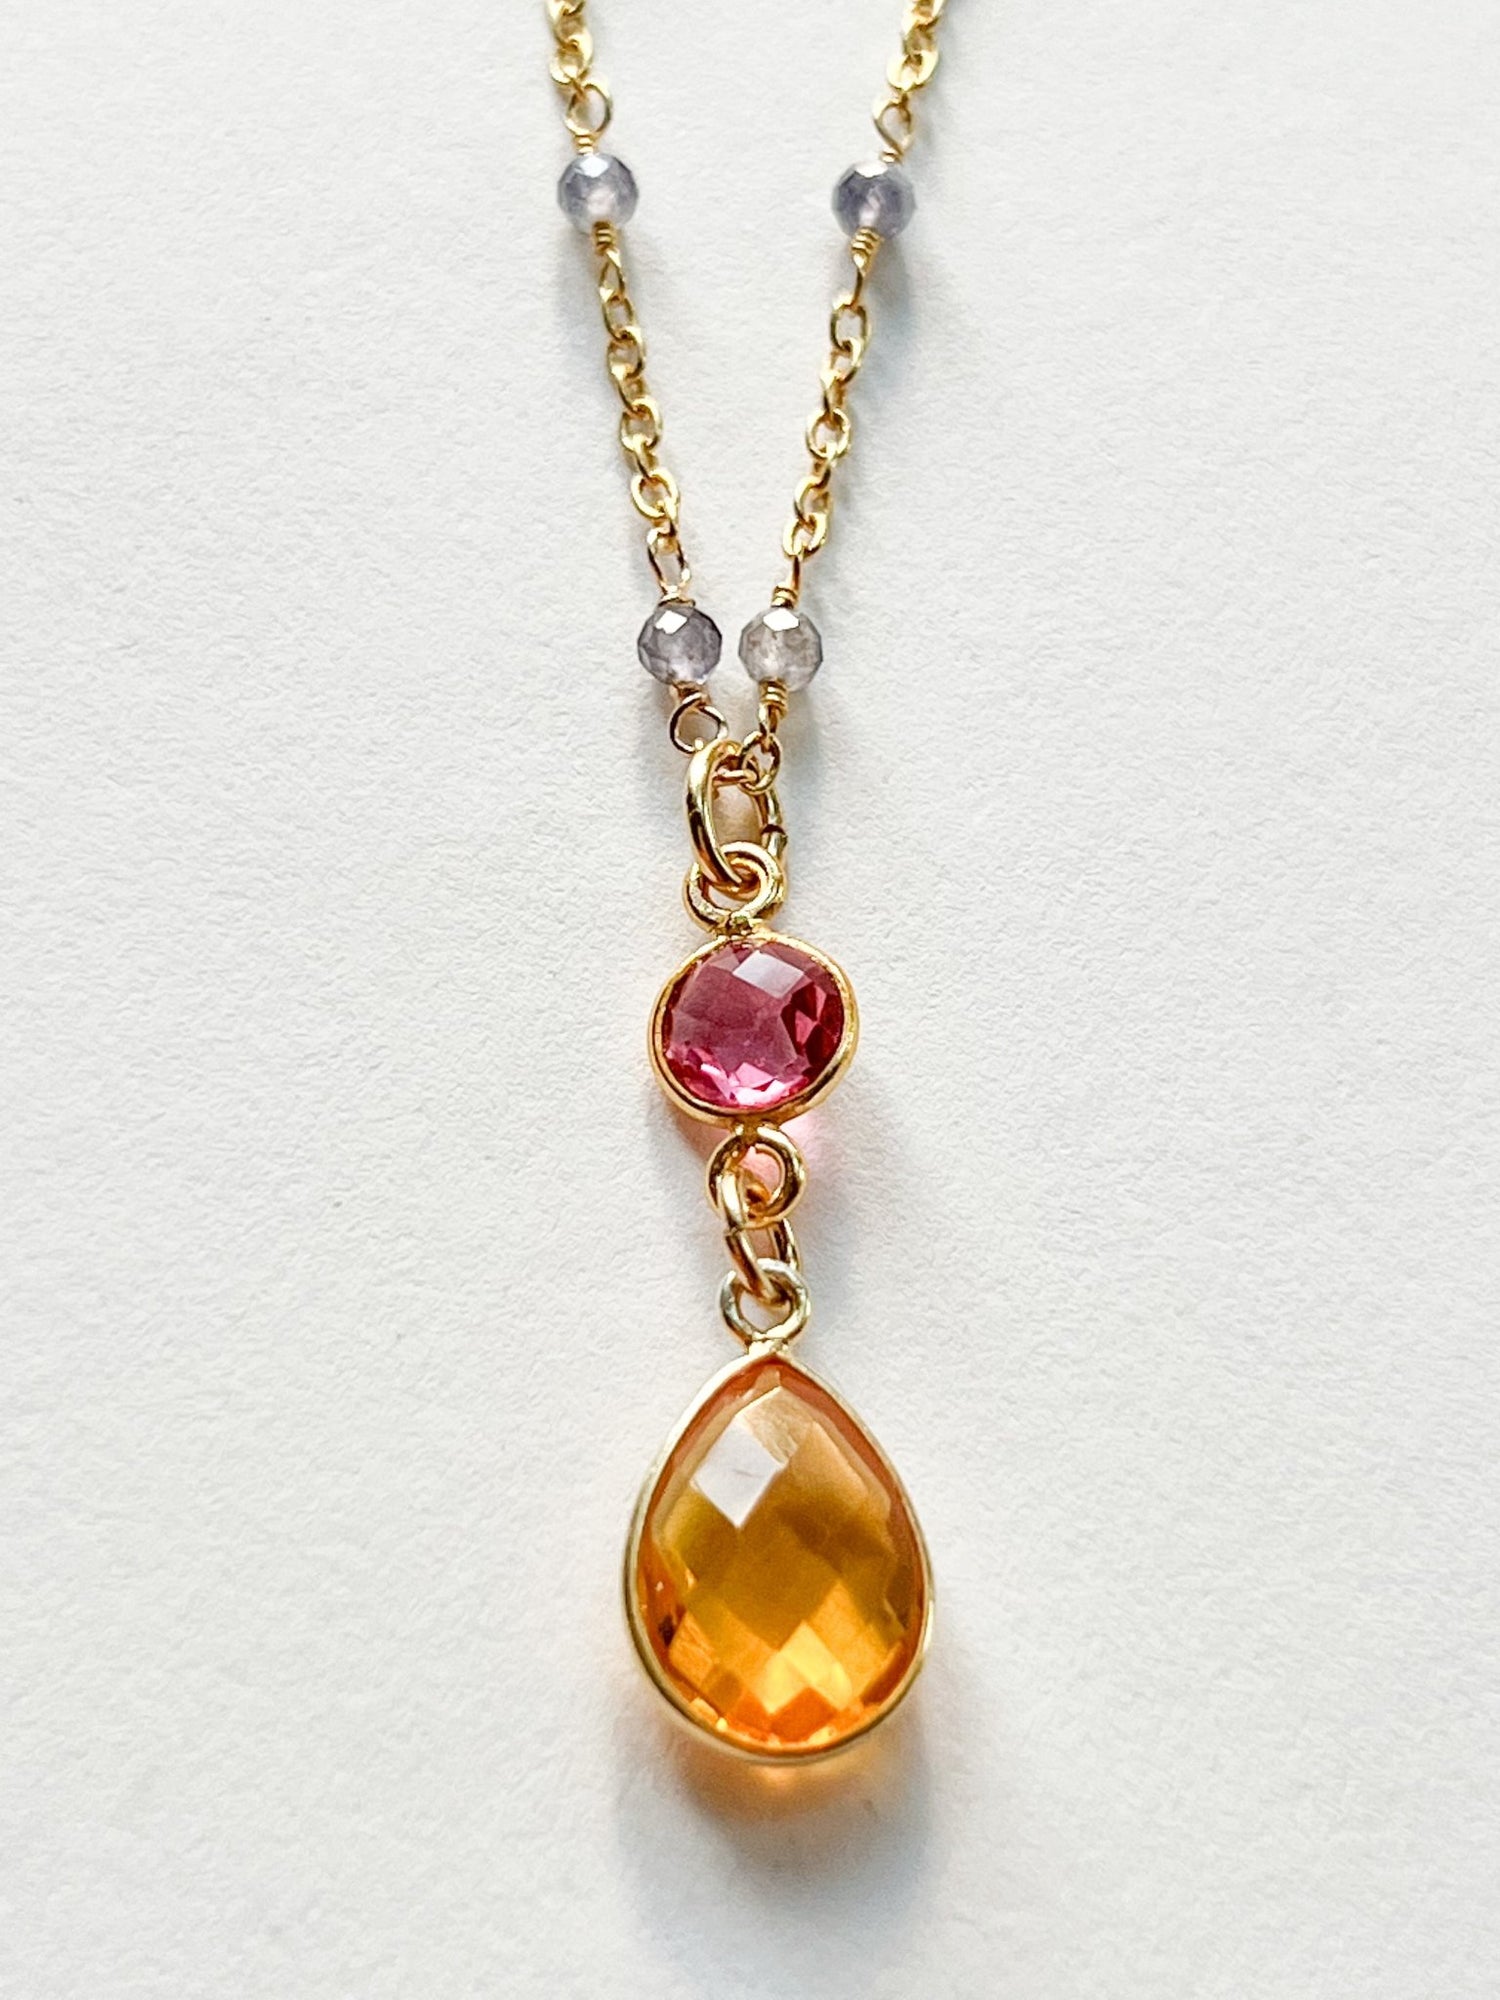 Citrine and Pink Hydro Quartz Double Drop Pear Shaped Pendant Necklace on Gold Chain with Iolite by Sage Machado - The Sage Lifestyle